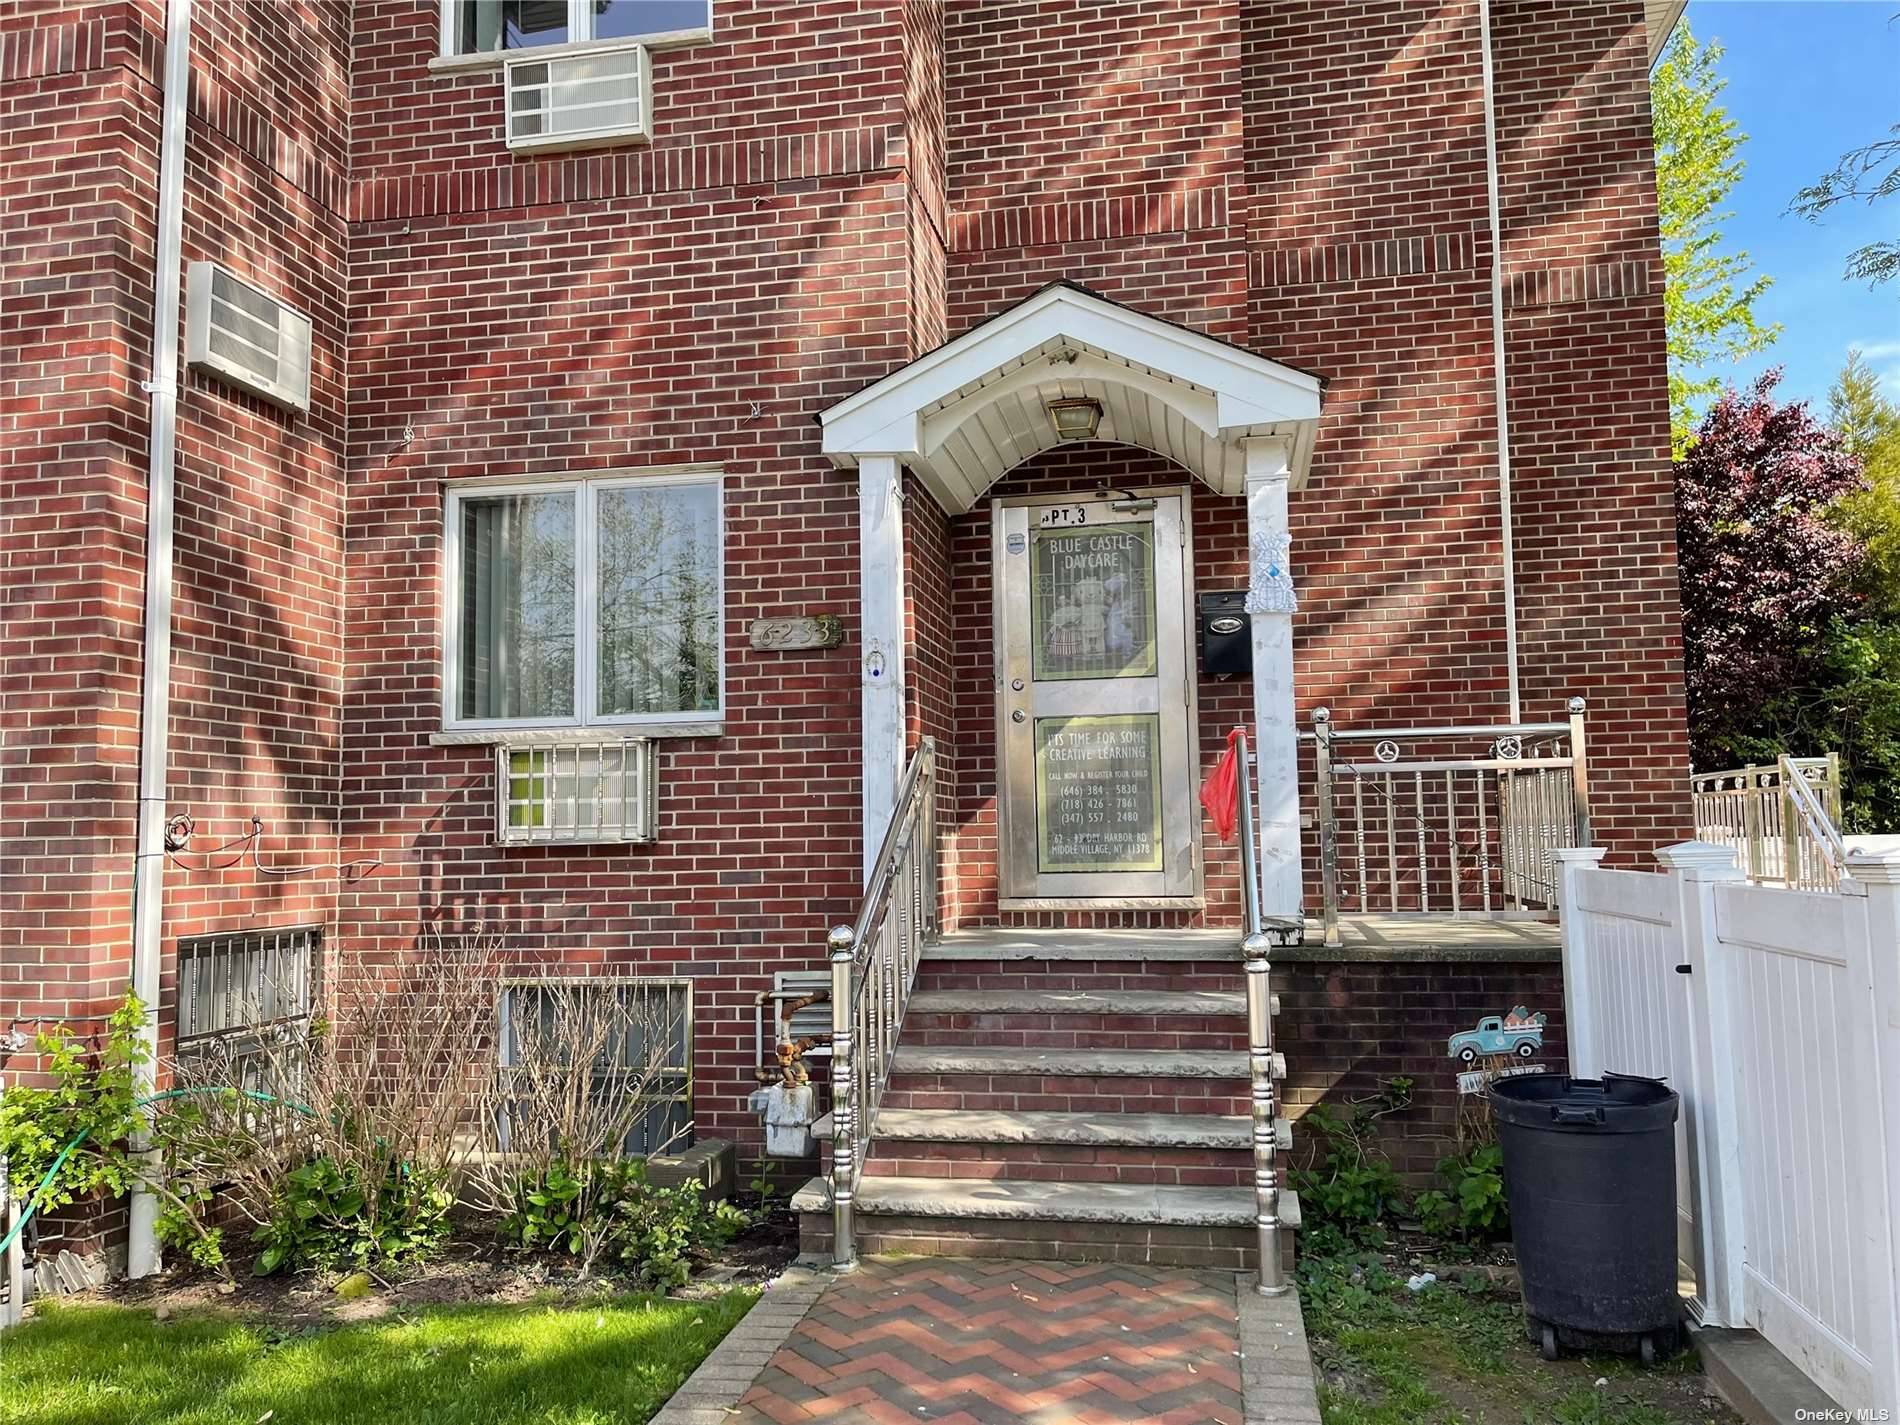 This 3 bedroom, 2 amp ; 1 2 bath duplex apartment features beautiful hardwood floors, an eat in kitchen with access to the yard, a lovely dining and living room, ...